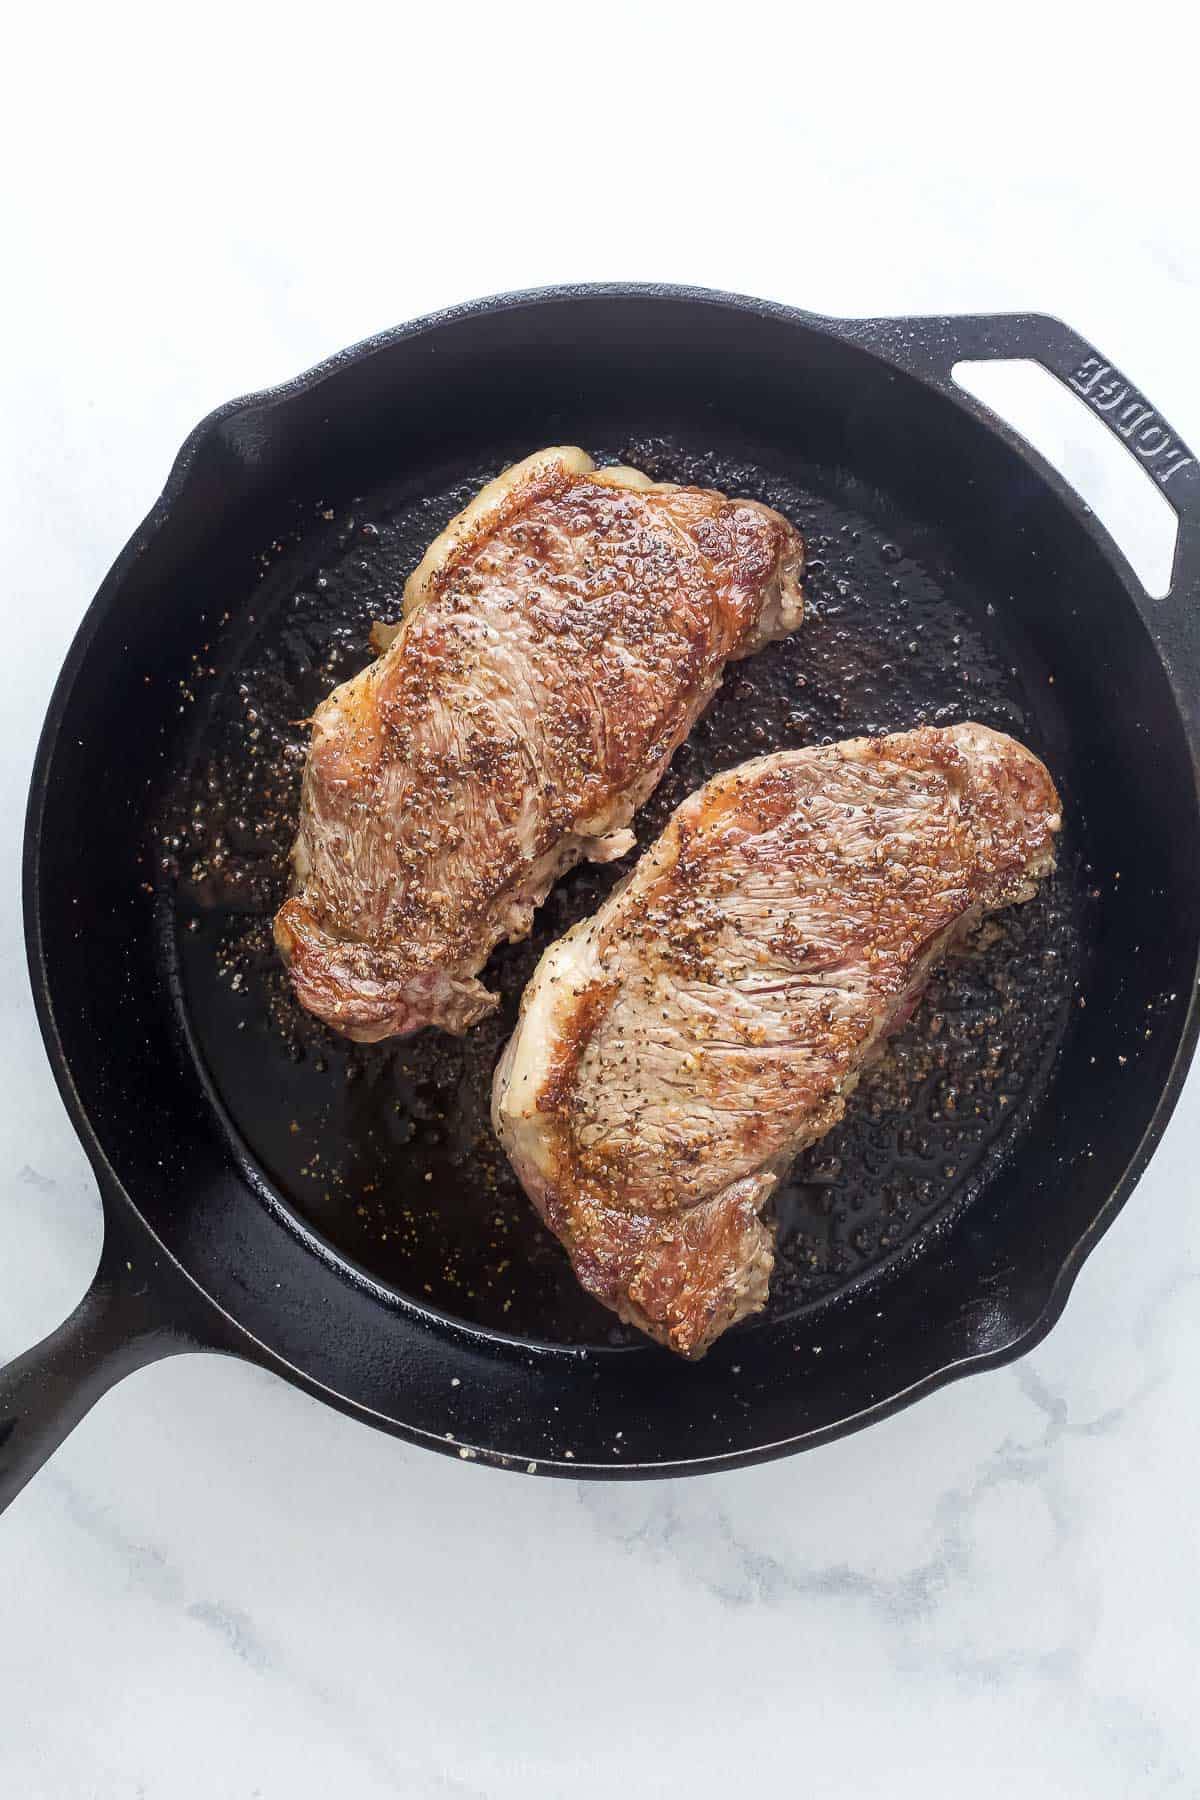 Fry the steak on the frying pan. 